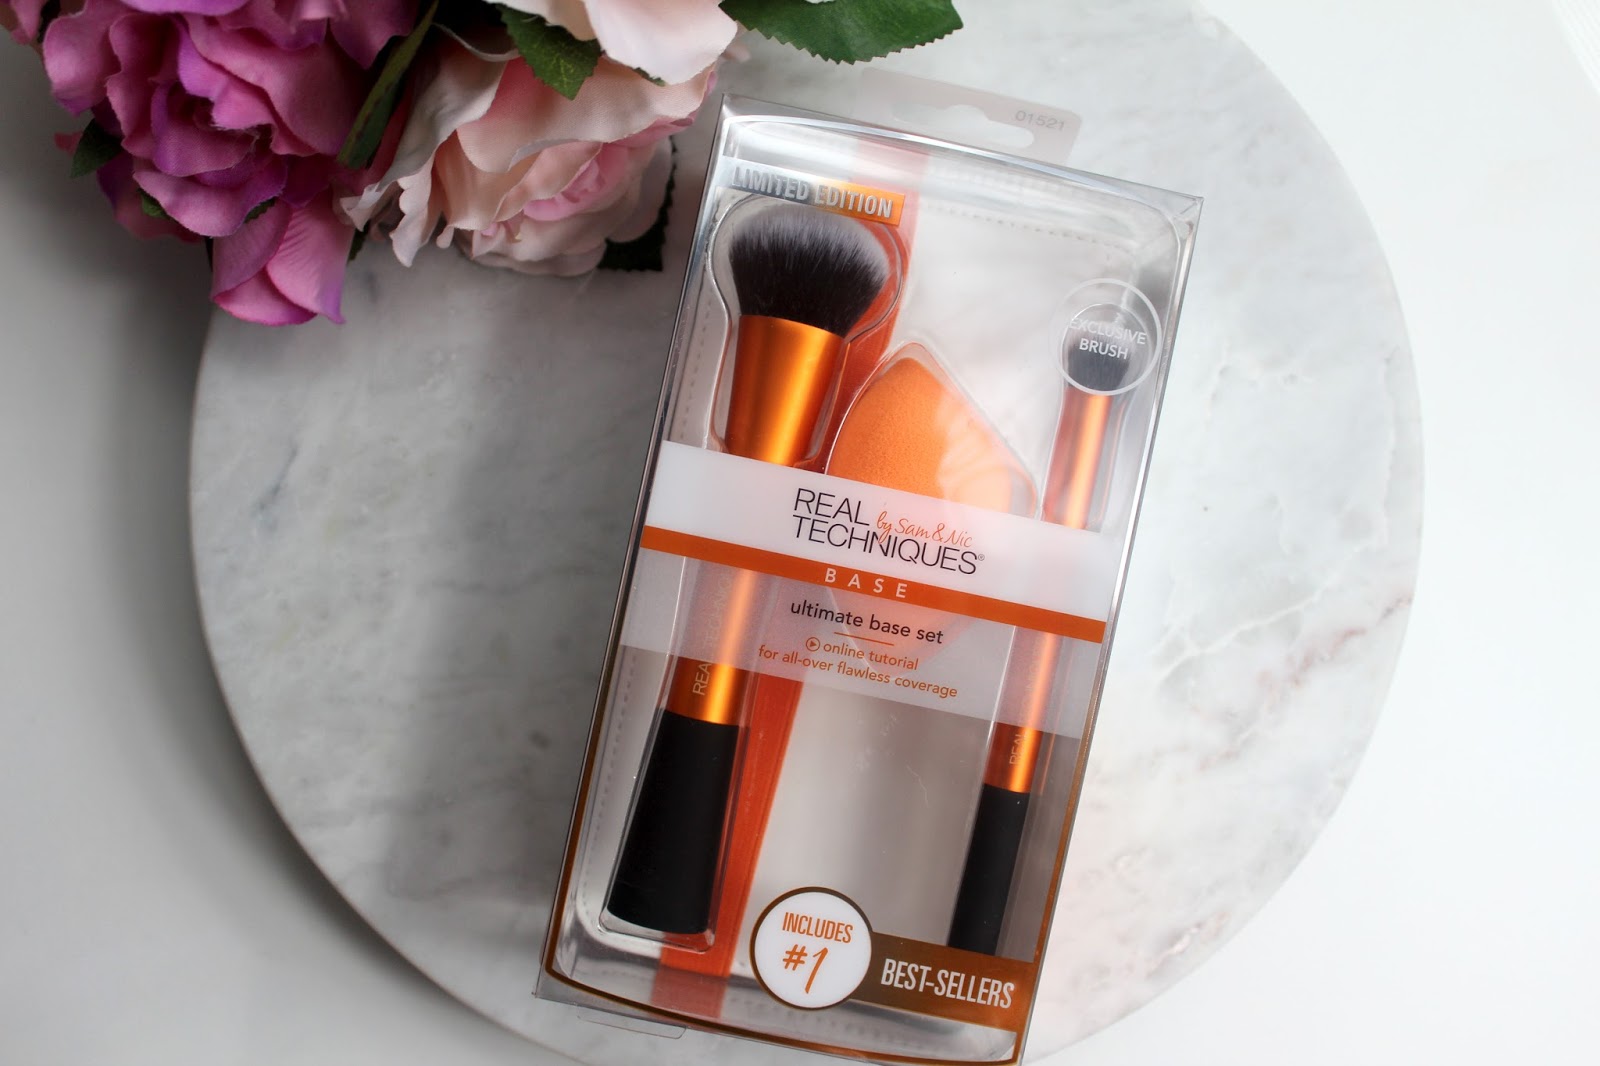 Review: Real Techniques Ultimate Base Set, Miracle Sculpting